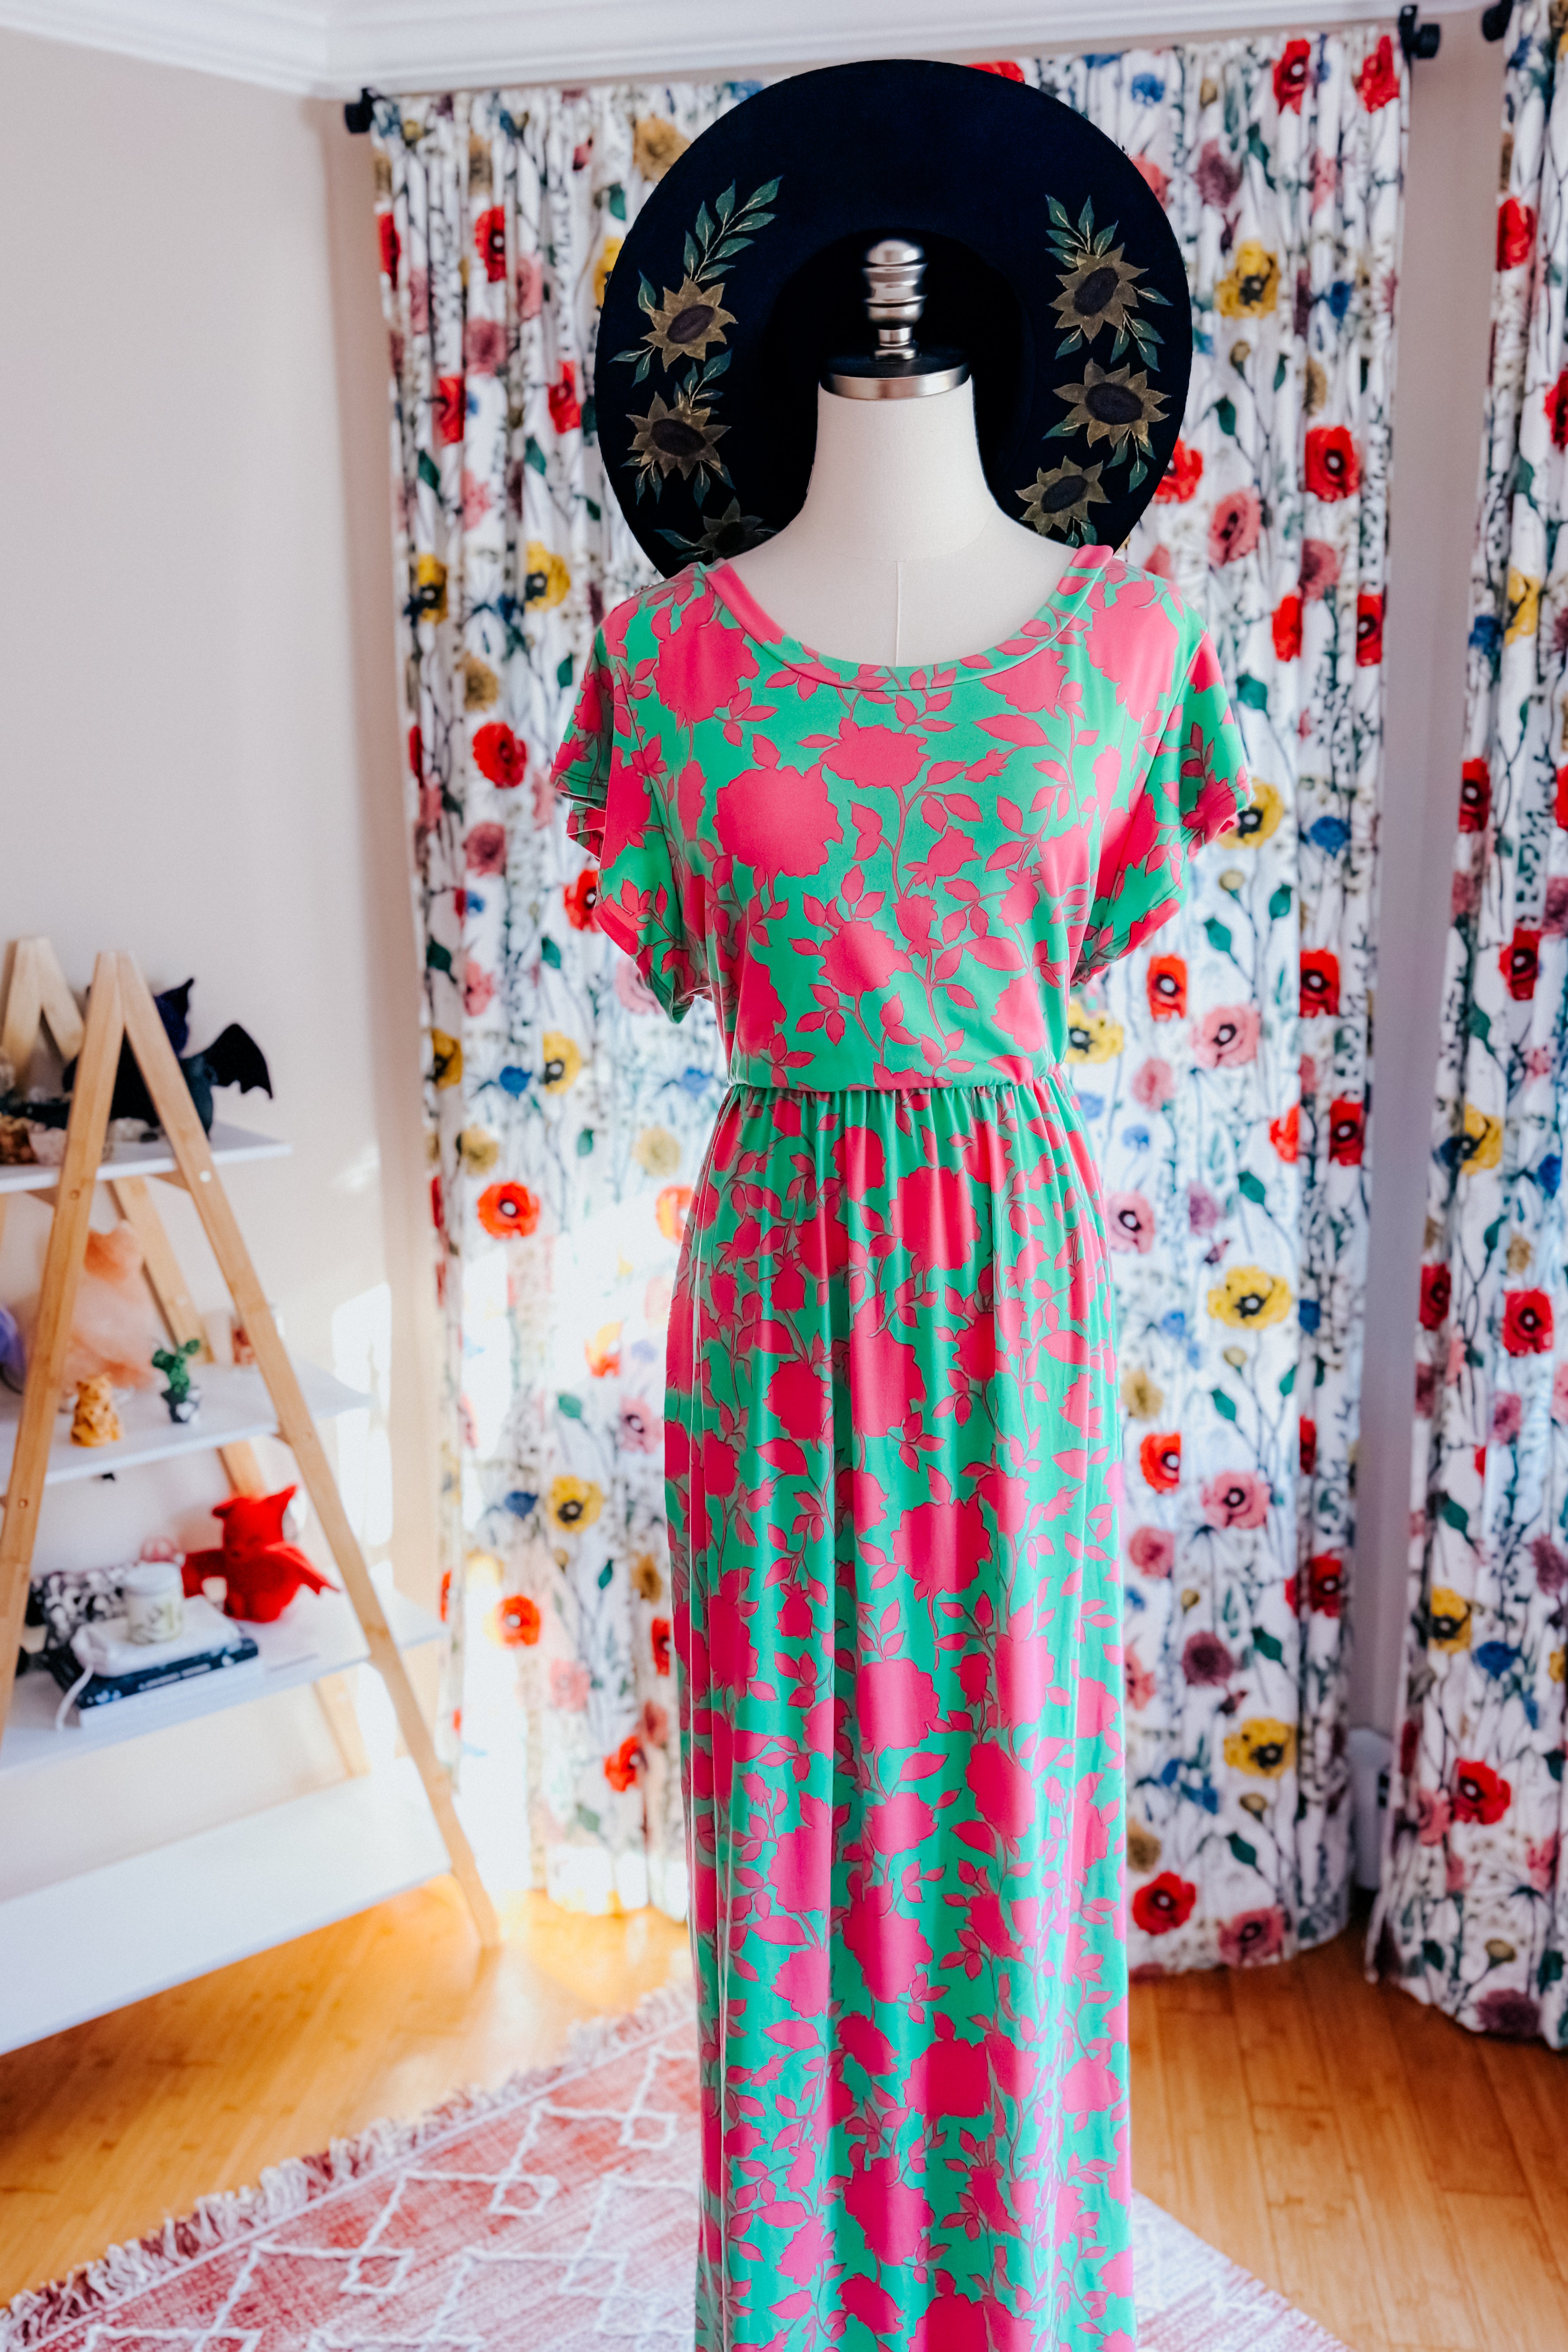 Stand Out Floral Fit & Flare Maxi Dress